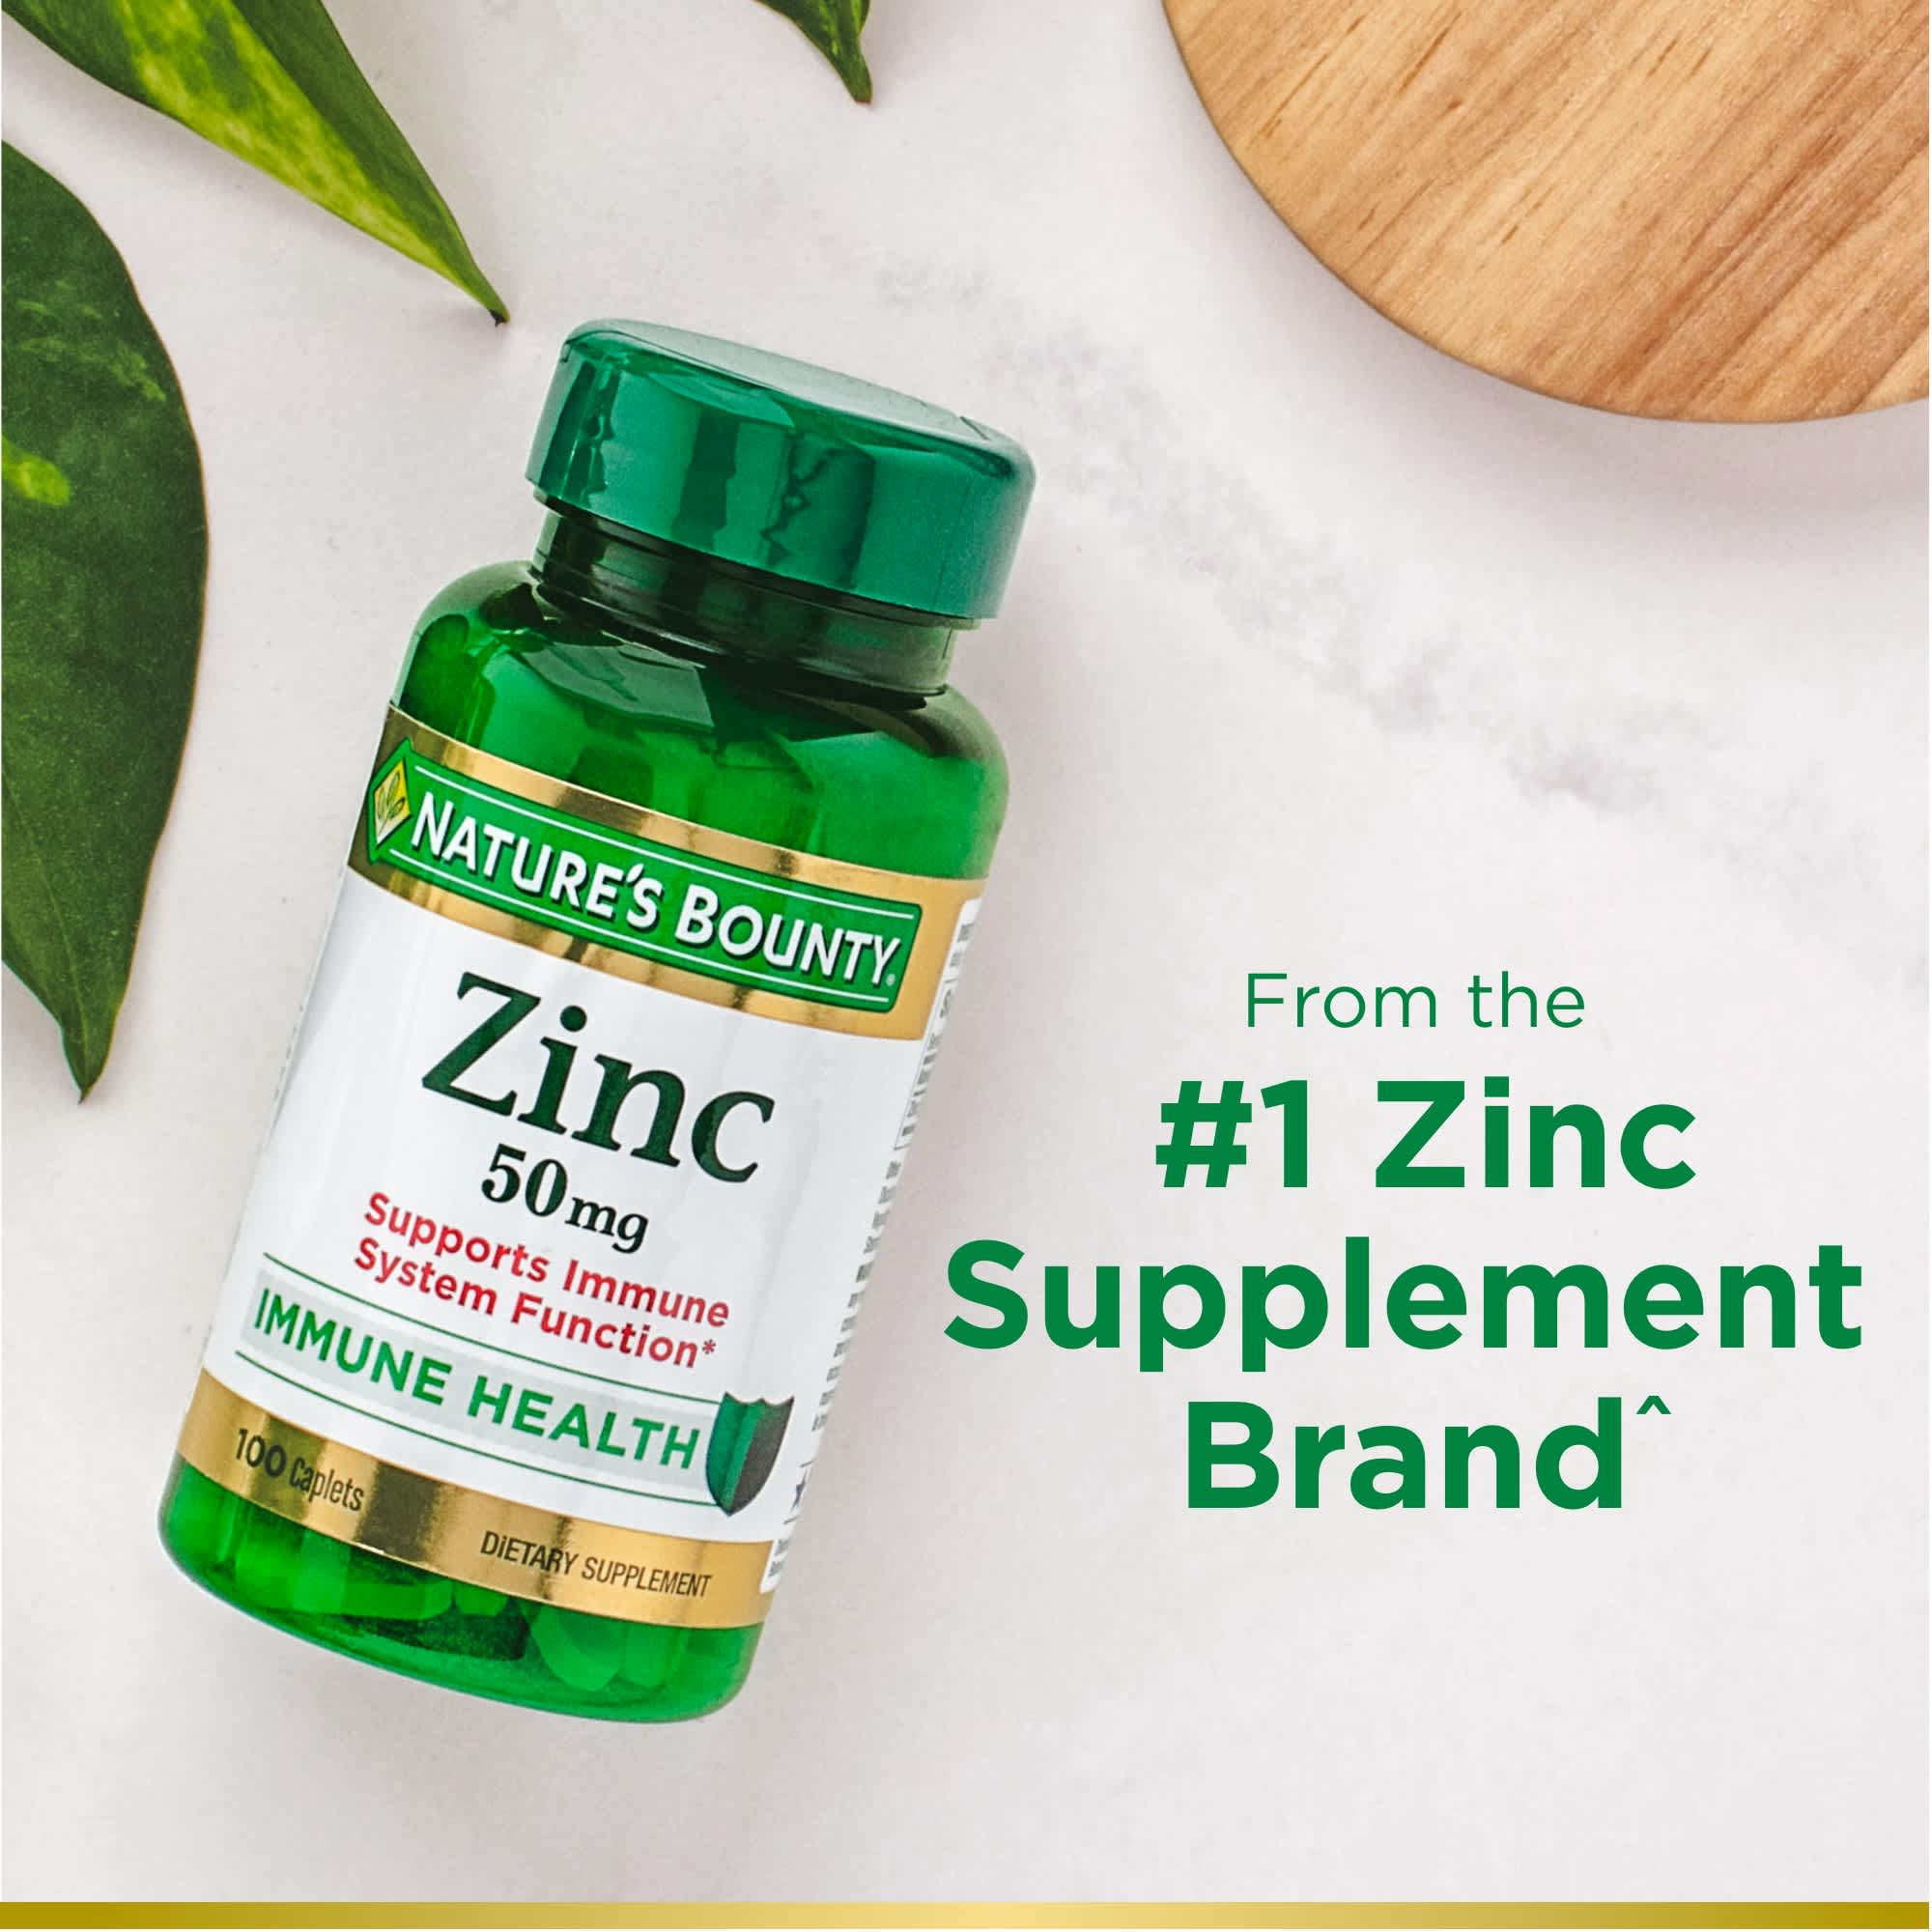 Nature’s Bounty Zinc, Immune Support Supplement, 50 mg, 100 Caplets - image 5 of 11